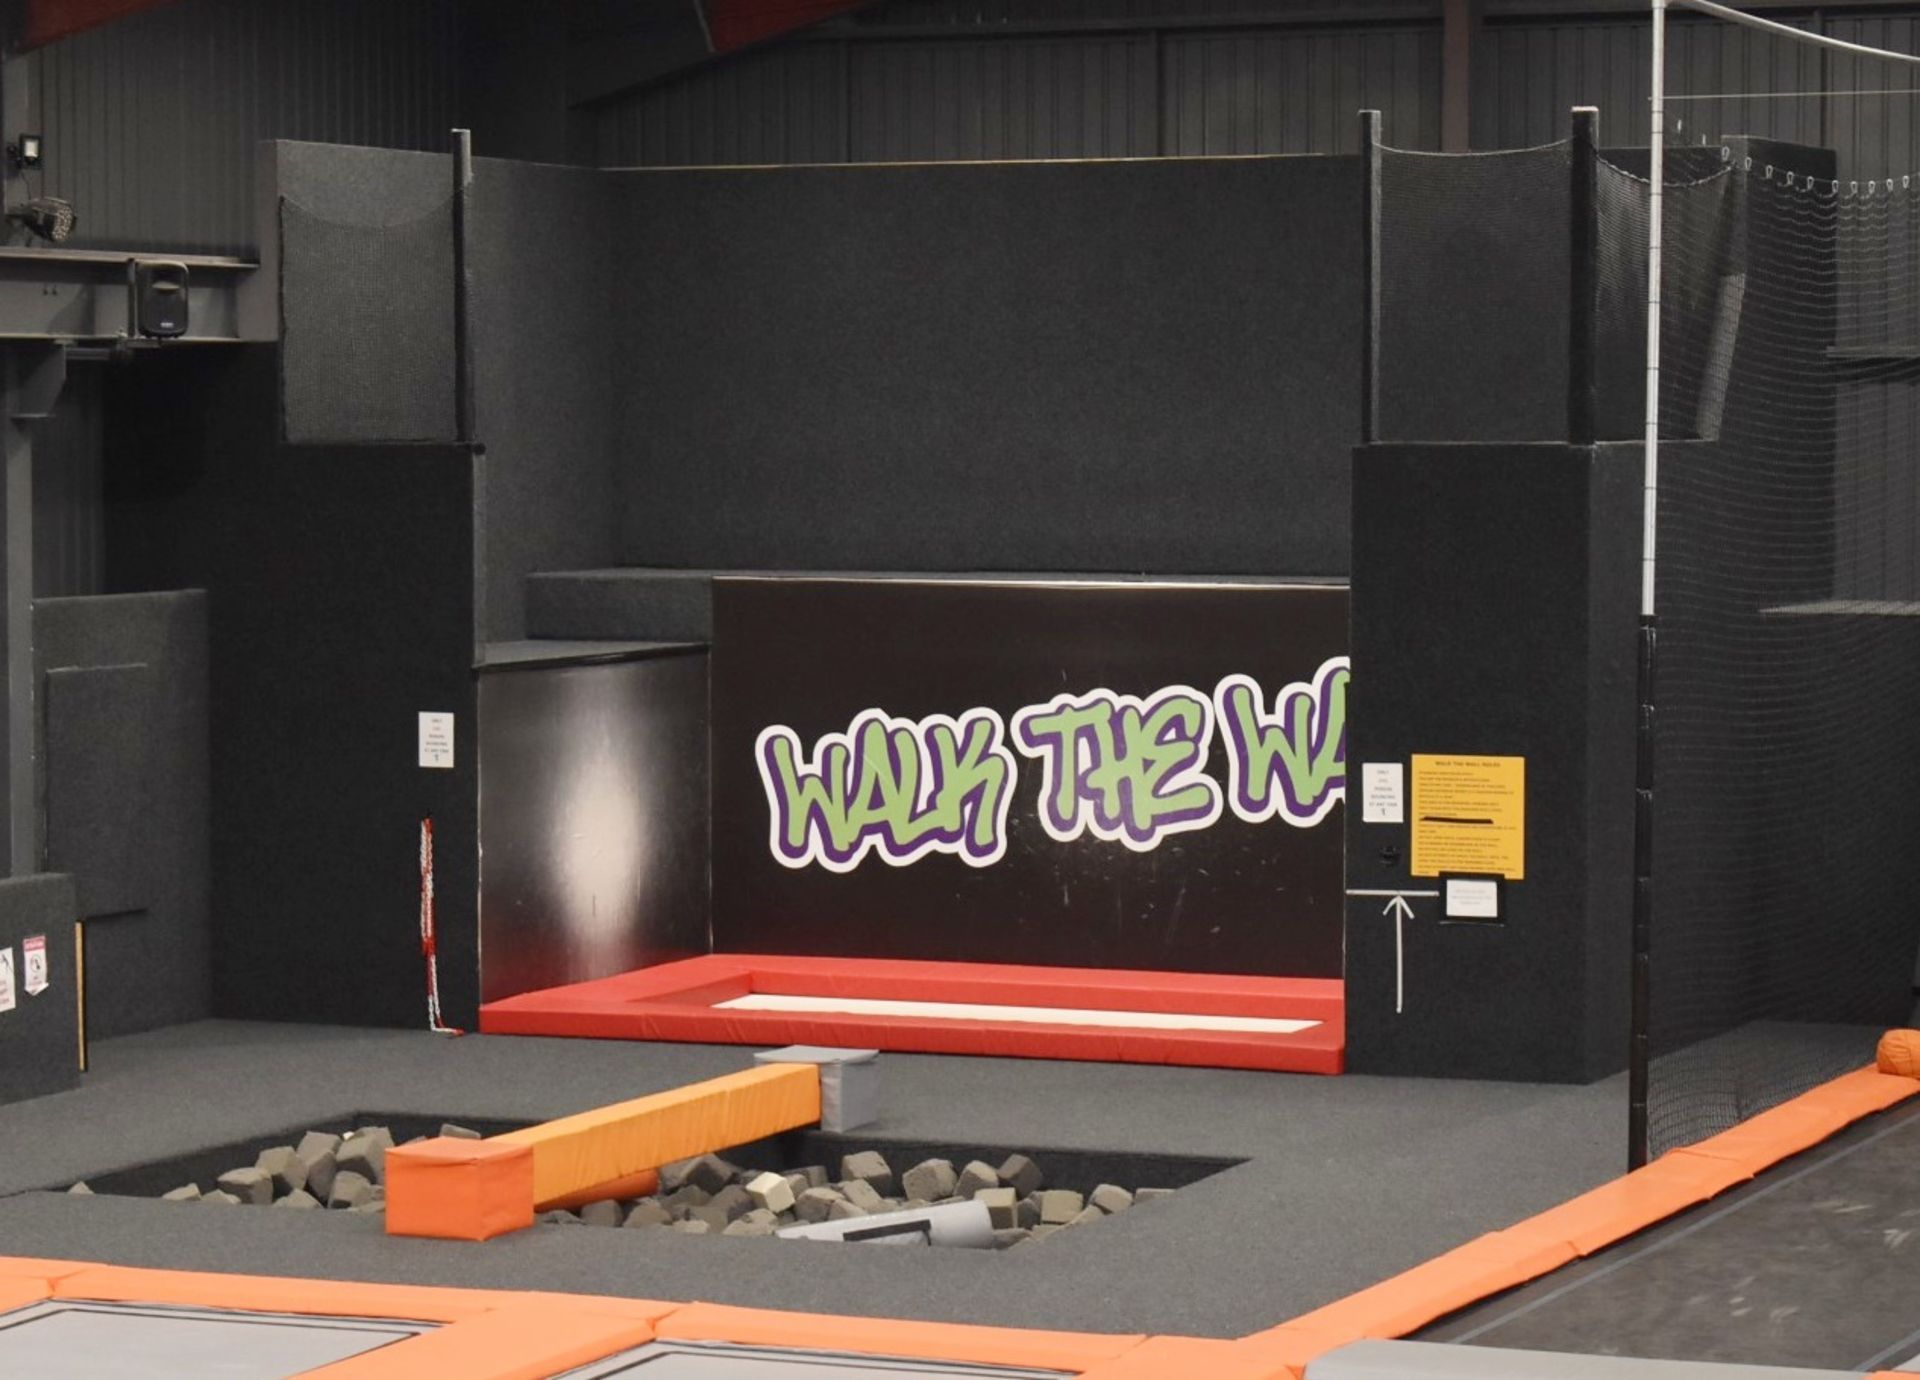 1 x Large Trampoline Park - Disassembled - Includes Dodgeball Arena And Jump Tower - CL766  - - Image 34 of 99